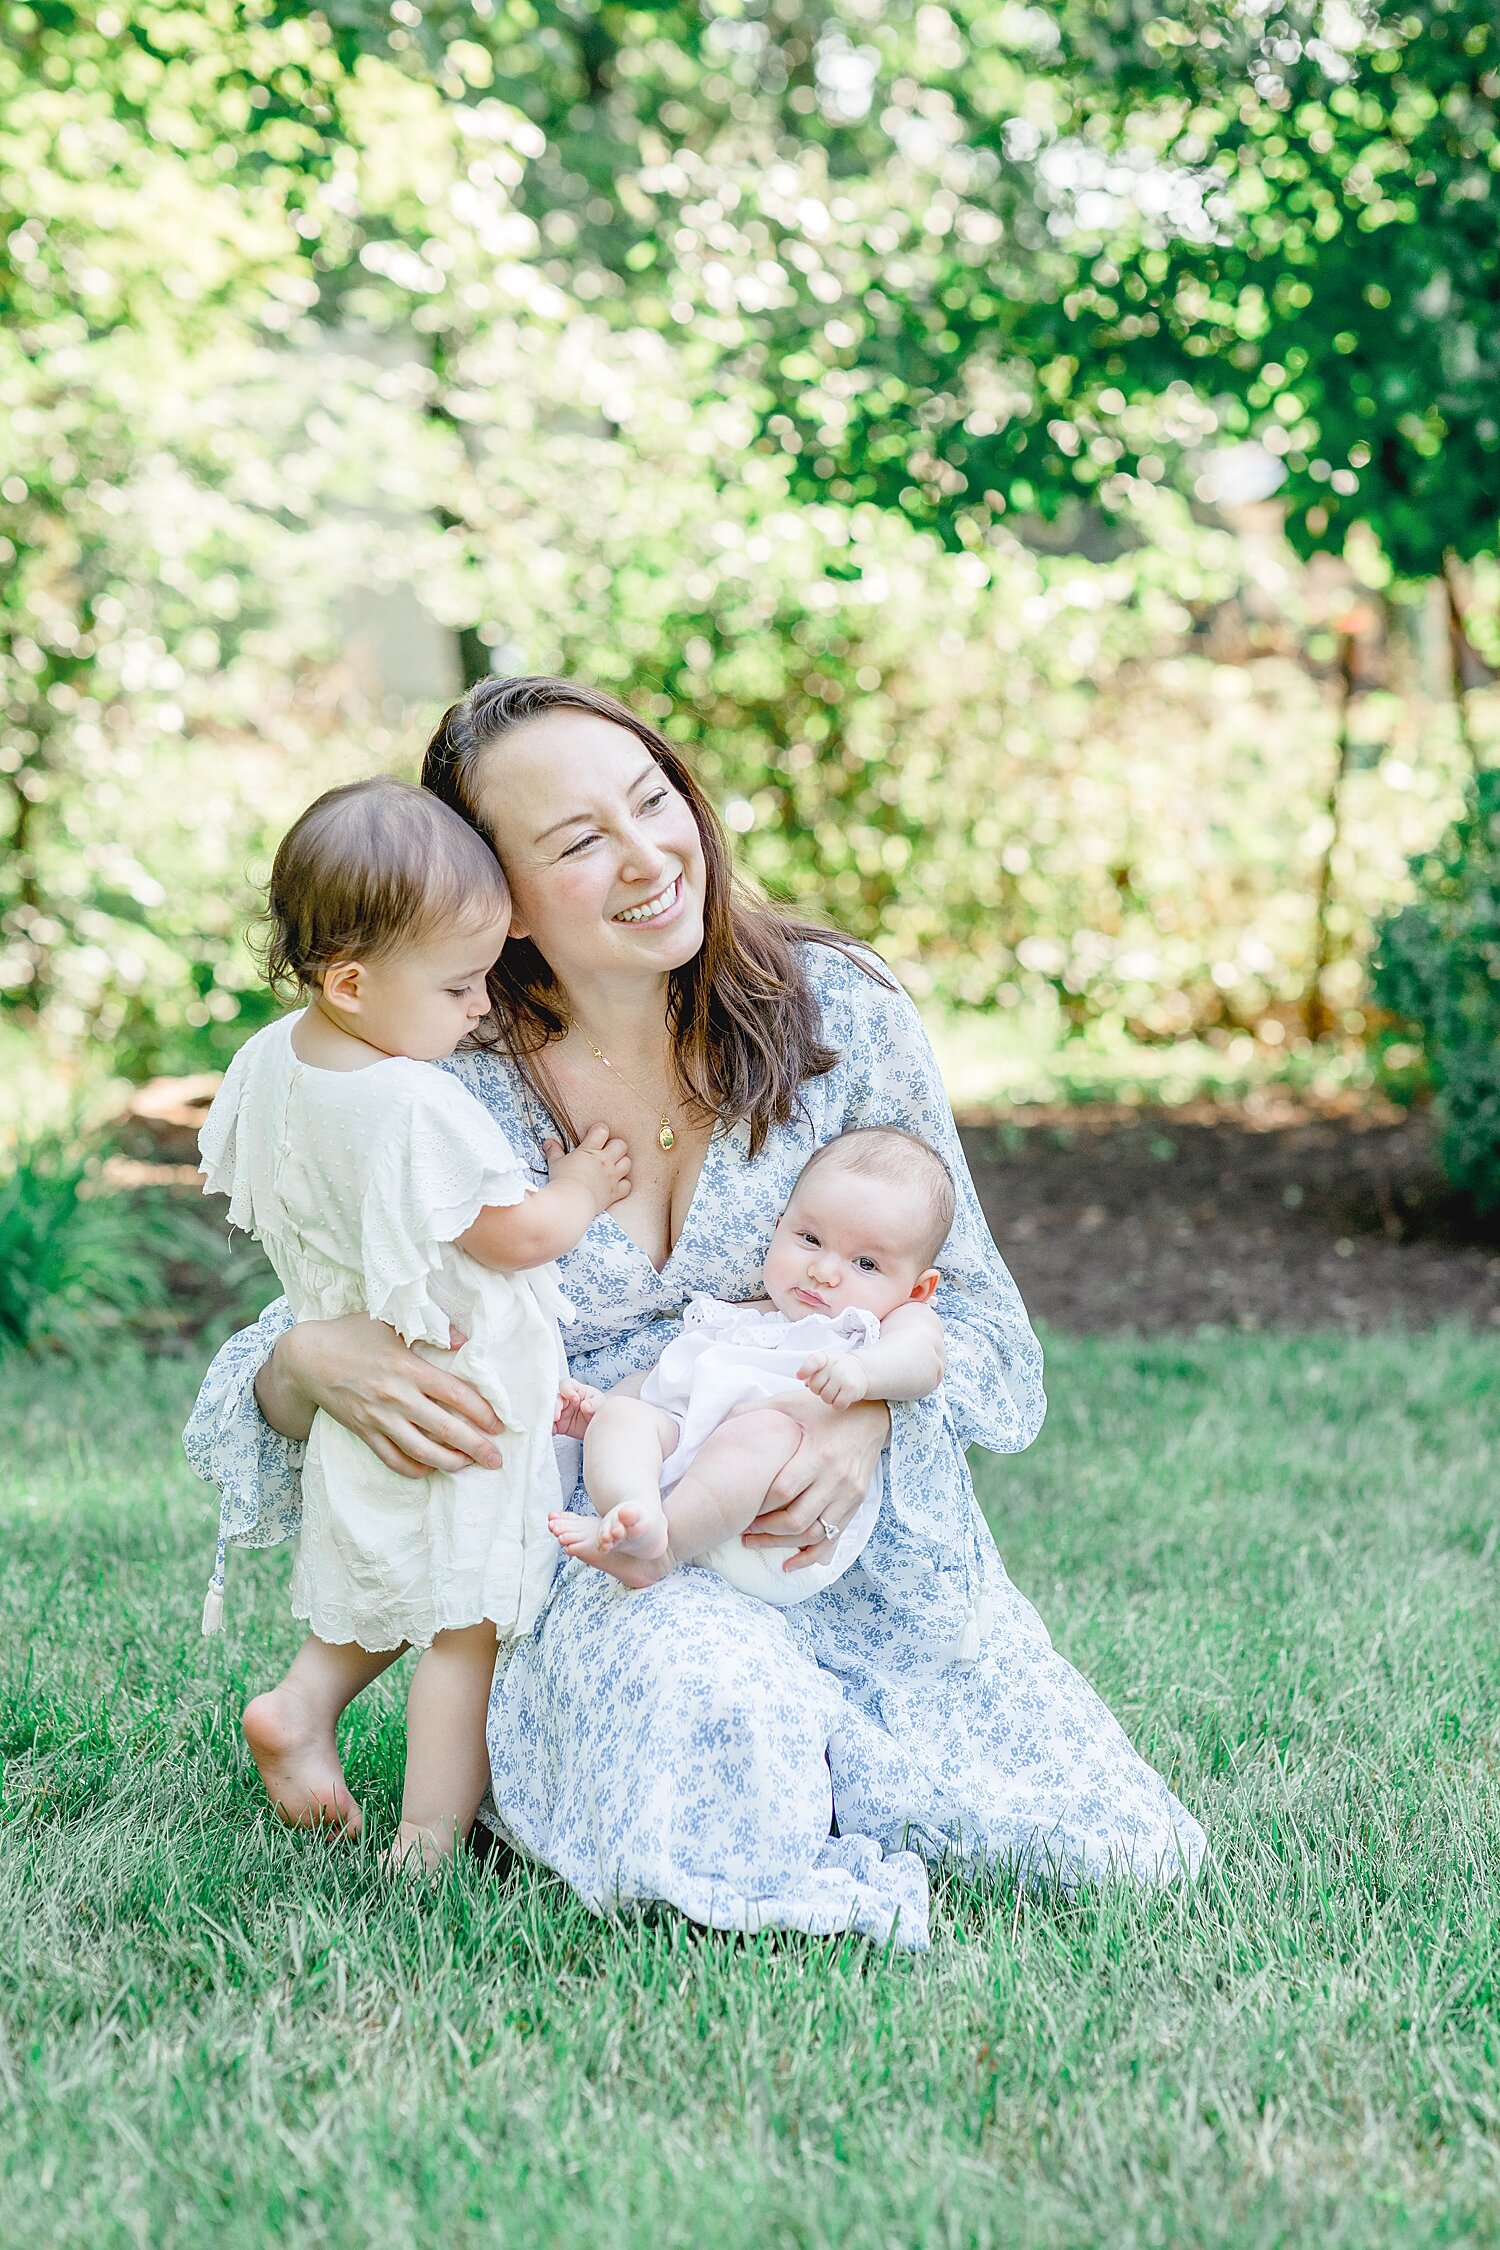 Sweet moment between Mom and her two girls during outdoor newborn session. Photos by Connecticut Newborn Photographer, Kristin Wood Photography.